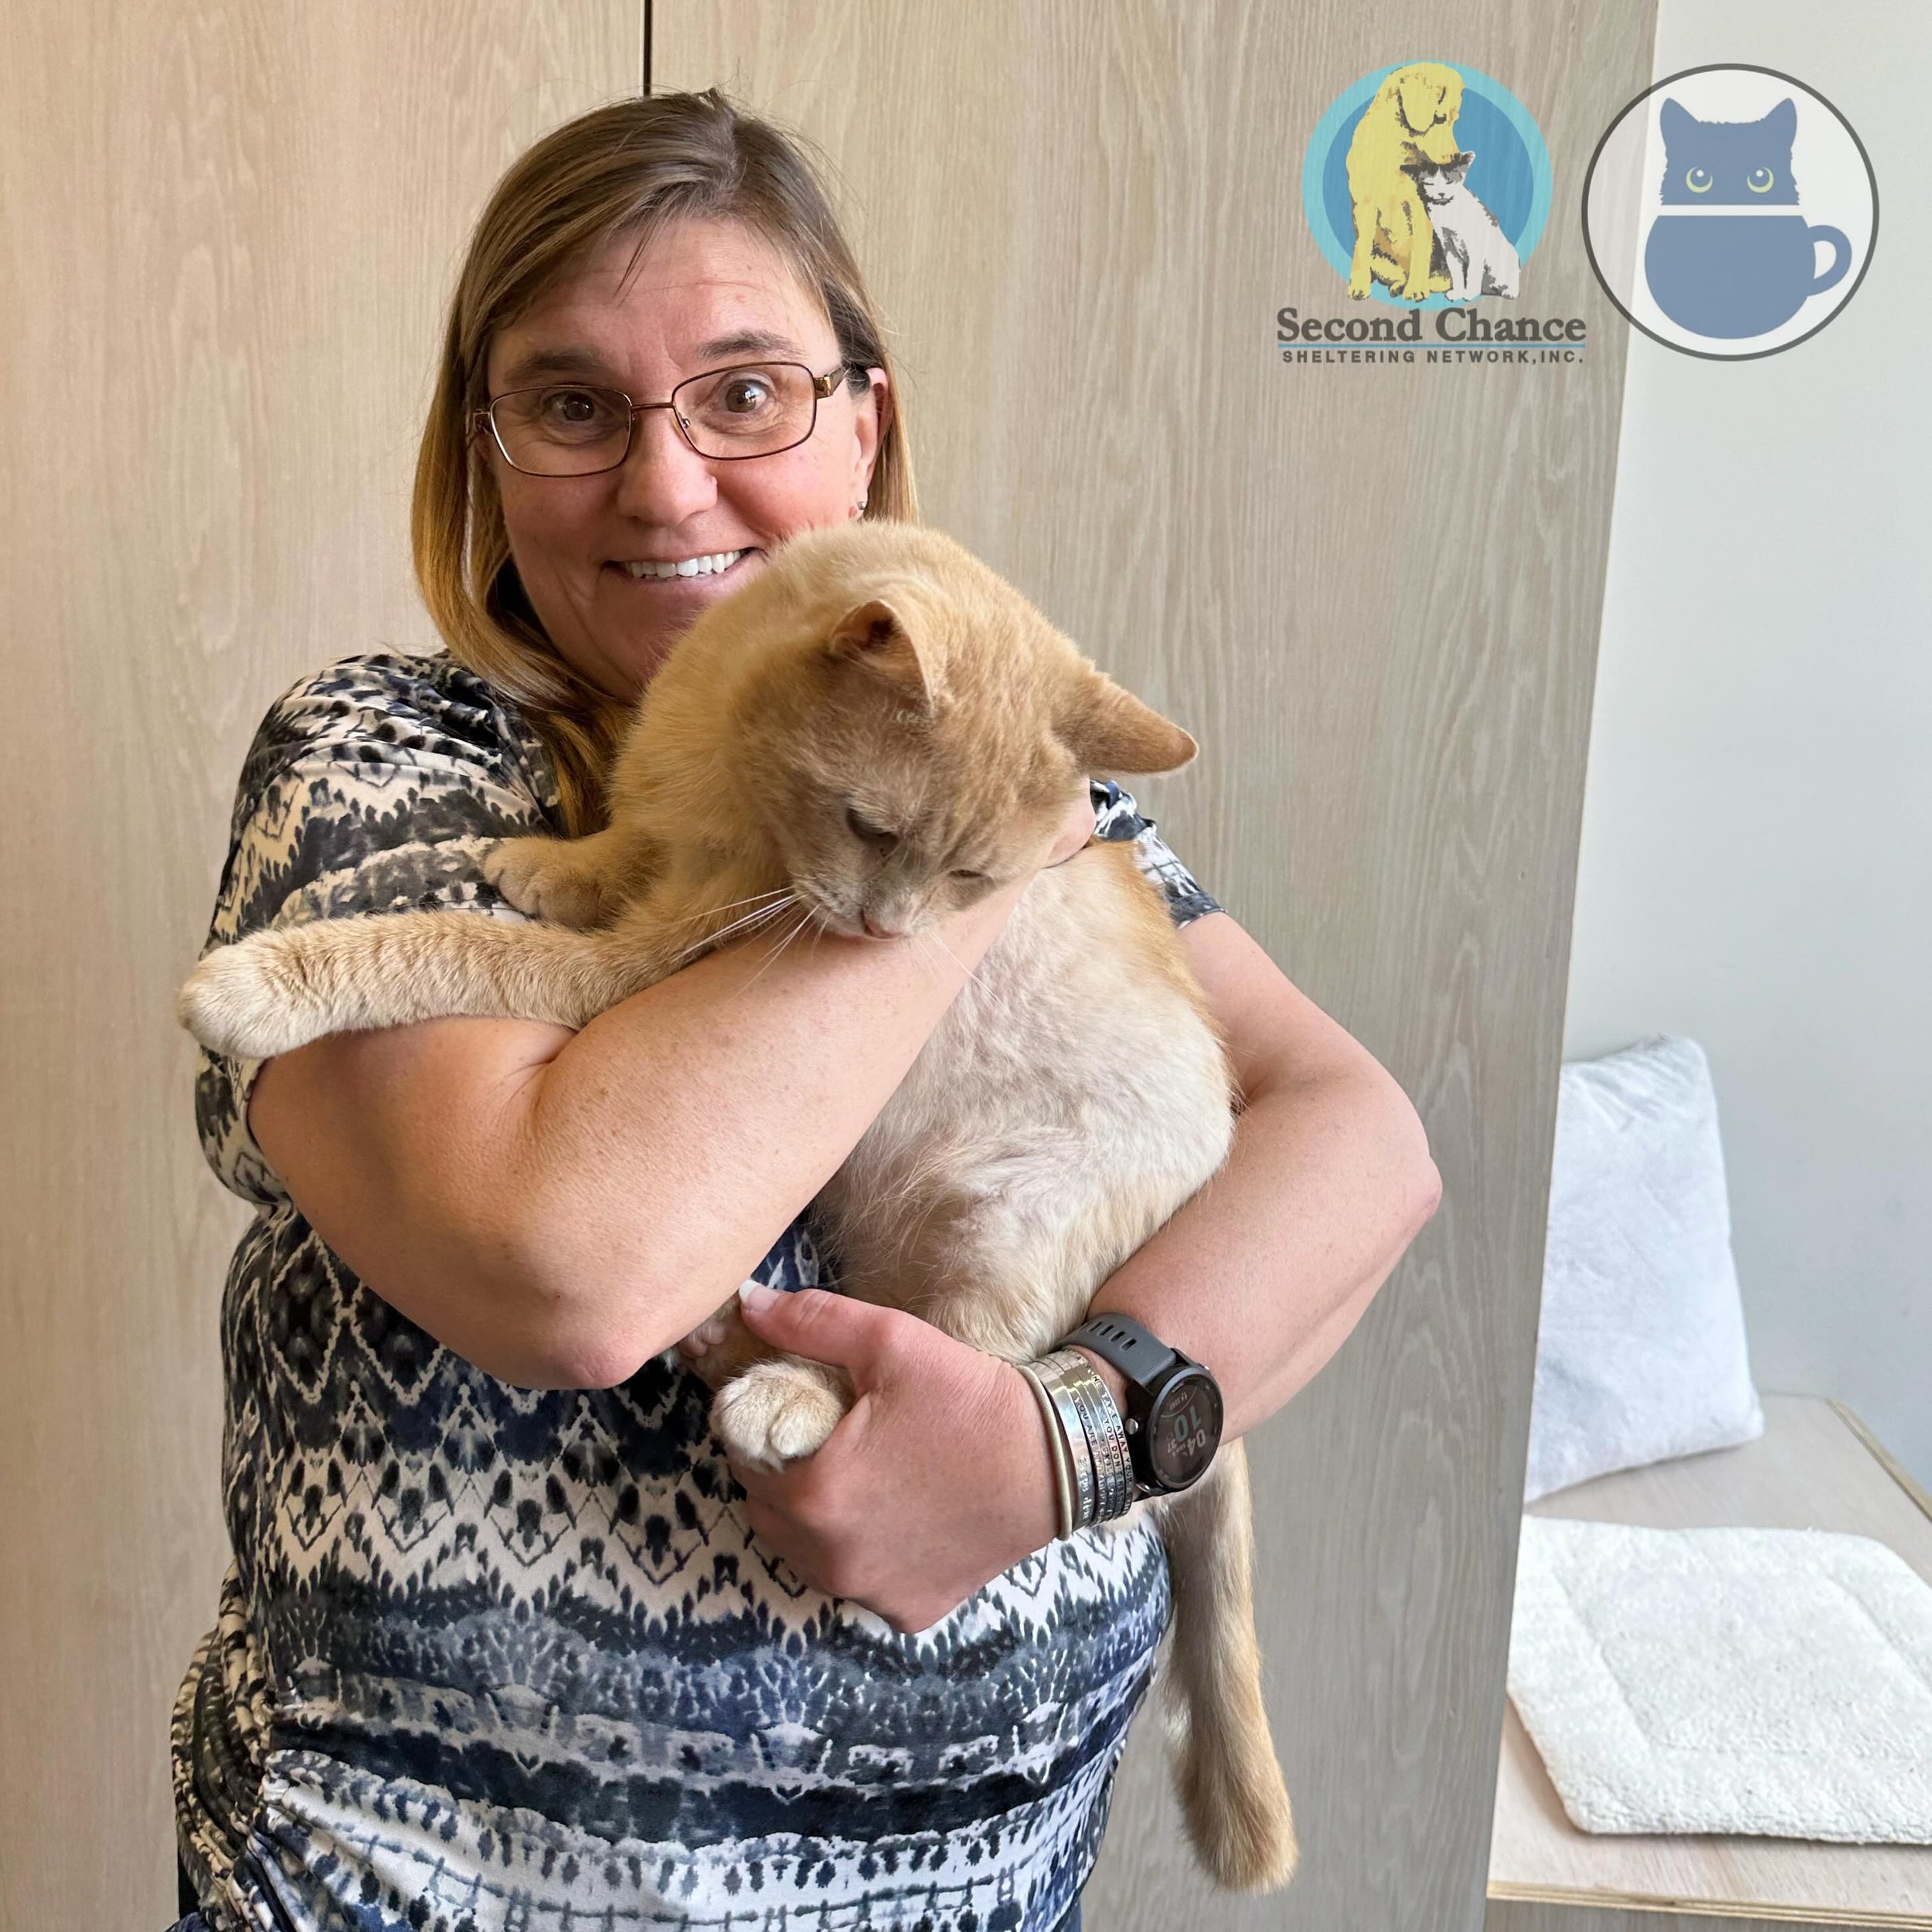 Hurray for Channing, our FIV+ boy who has been recovering from a severe attack by another animal when he was a stray. Channing struck gold with his adopter, Lynn, who has lots of experience with FIV+ kitties. We know this big guy will thrive in his n